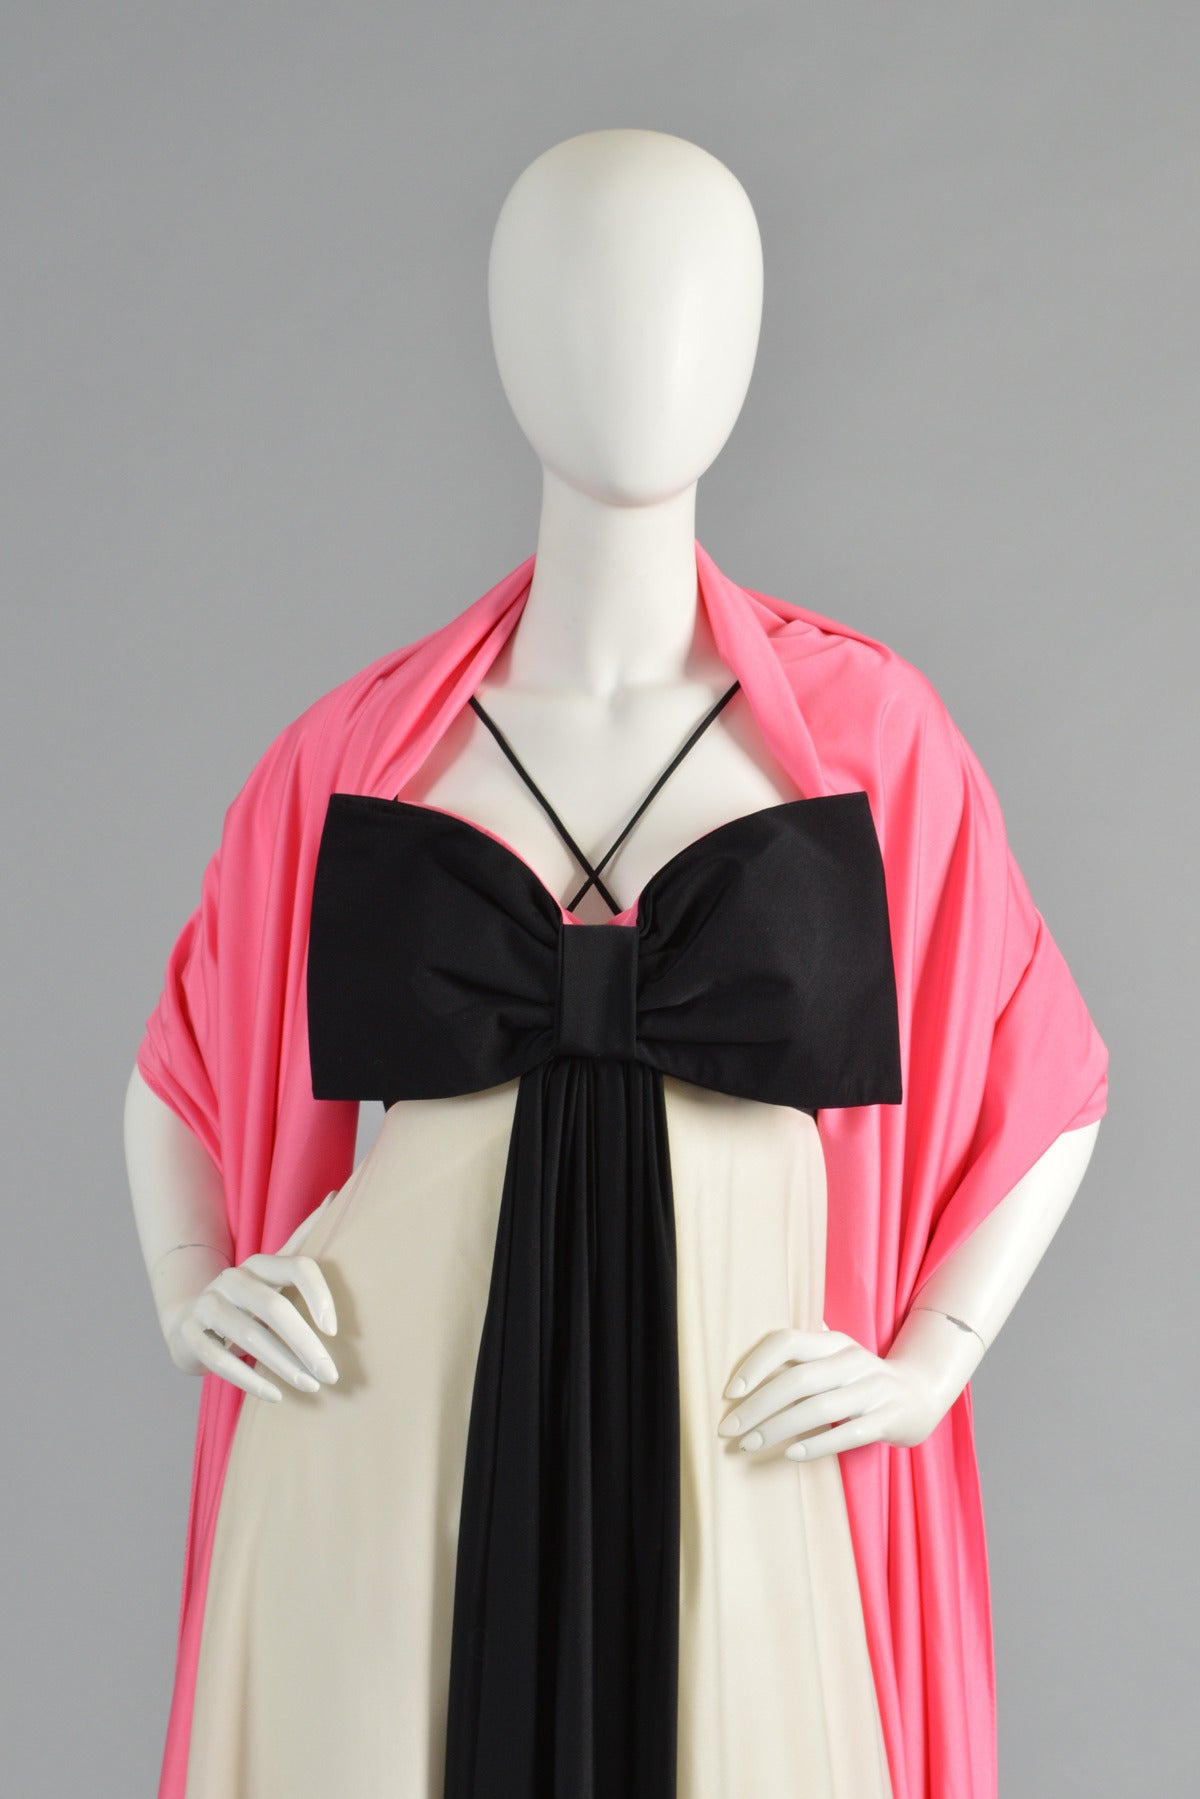 Women's Les Wilk 1970's Colorblock Evening Gown with Massive Bow For Sale